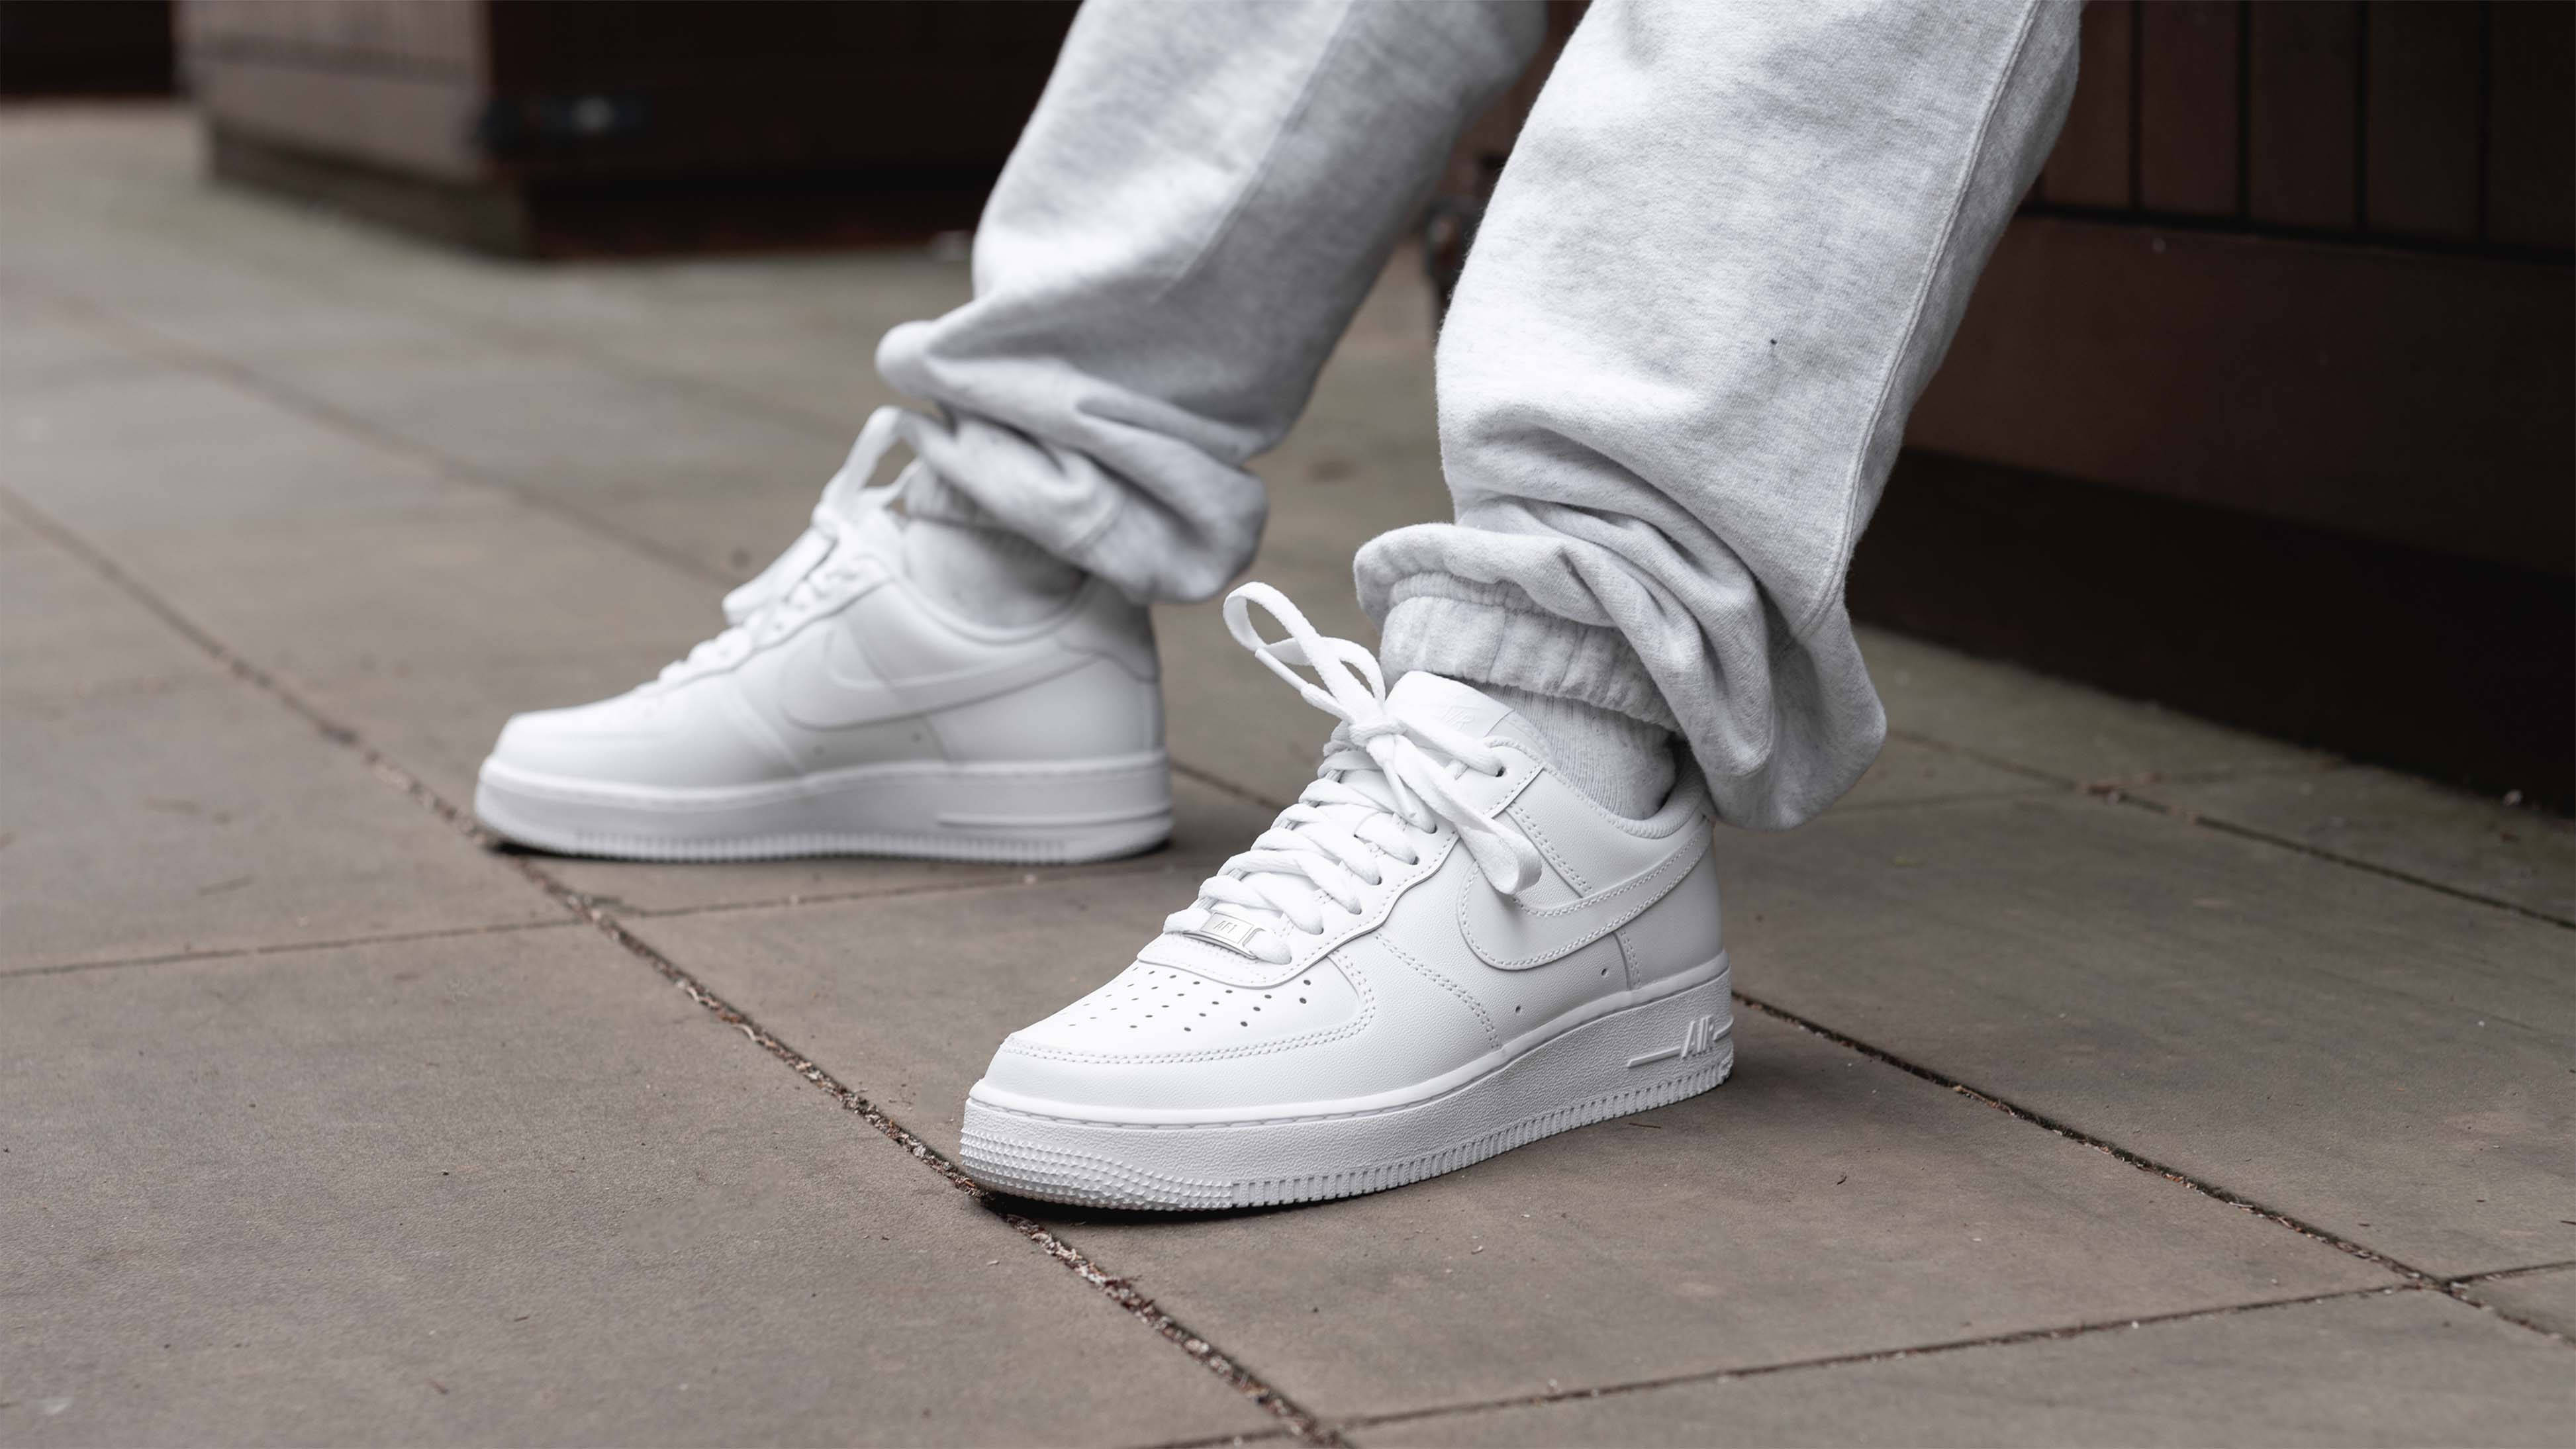 transfer Discreet fire Nike Air Force 1 Sizing: Does the Air Force 1 Fit True to Size? | The Sole  Supplier